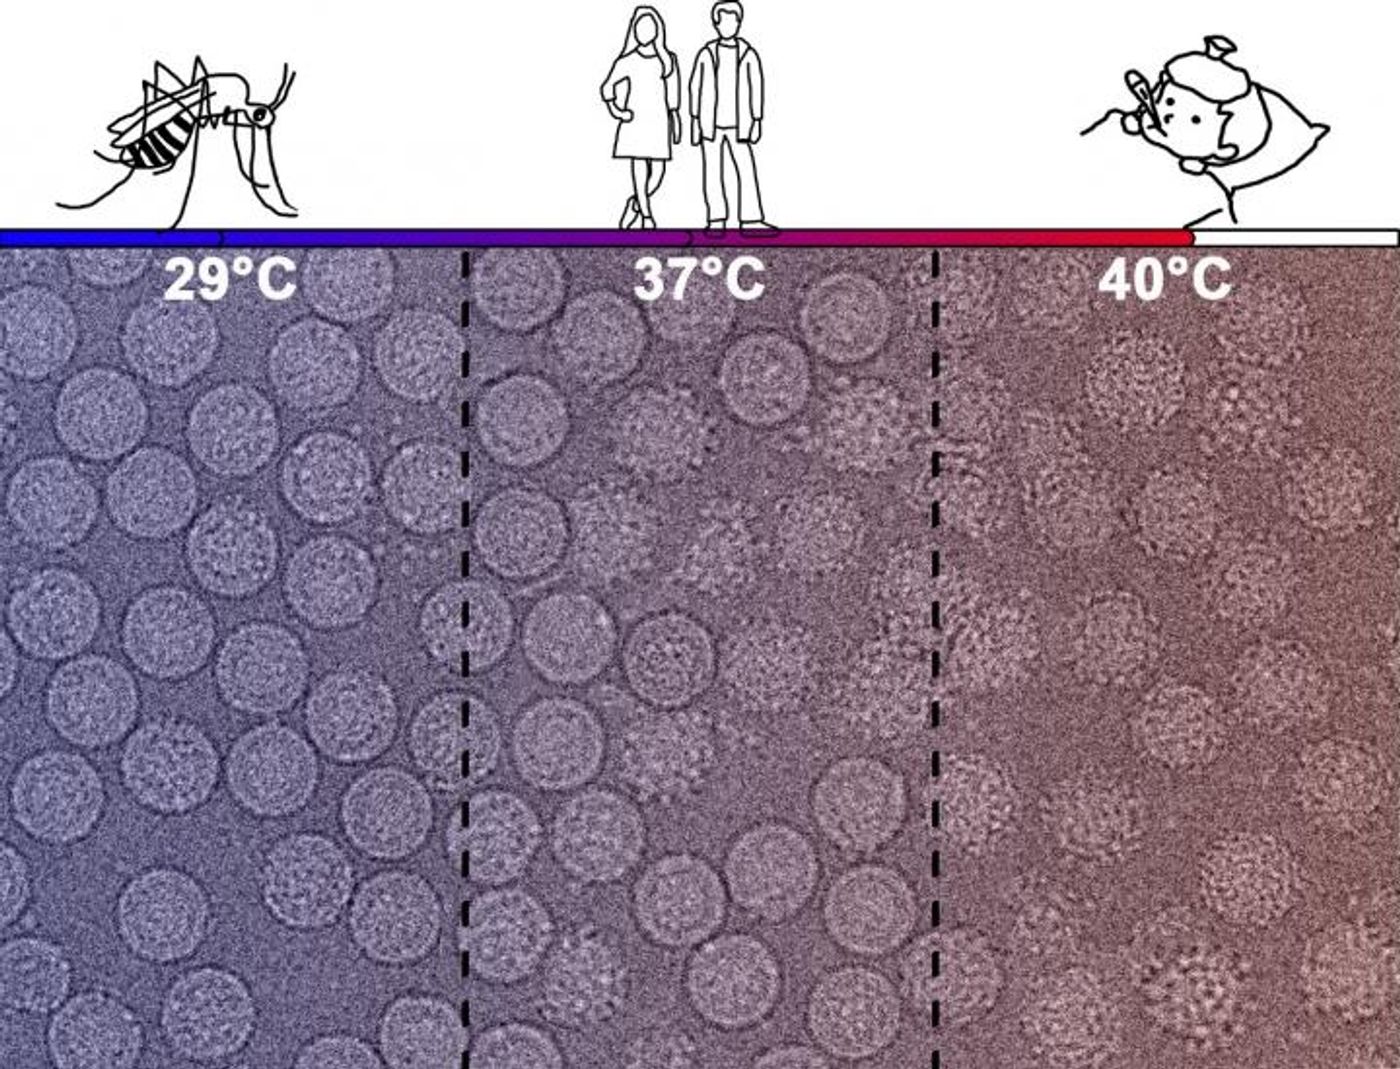 Micrographs of DENV2 with different surface particles when incubated at different temperatures - the physiological temperatures of mosquitoes (29°C, left), human (37°C, middle) and humans with a high fever (40°C, right). / Credit: Xin-Ni Lim, Emerging Infectious Diseases Program